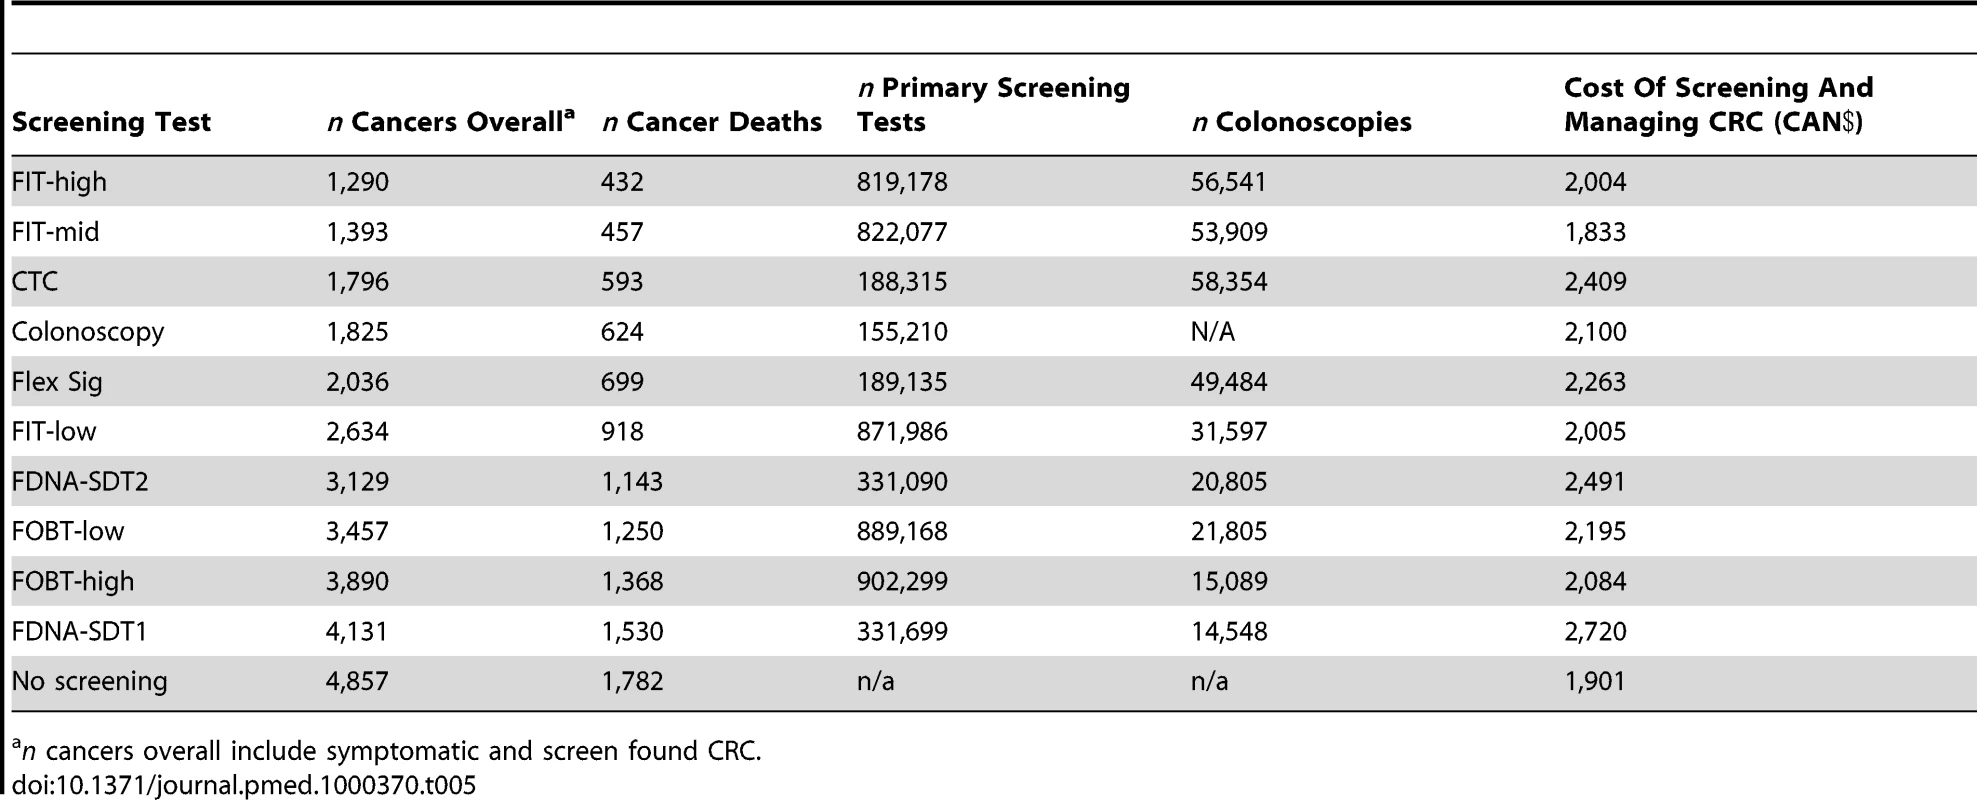 Cancer outcomes and number of screening tests required during the lifetimes for a hypothetical 100,000 average risk patient cohort.